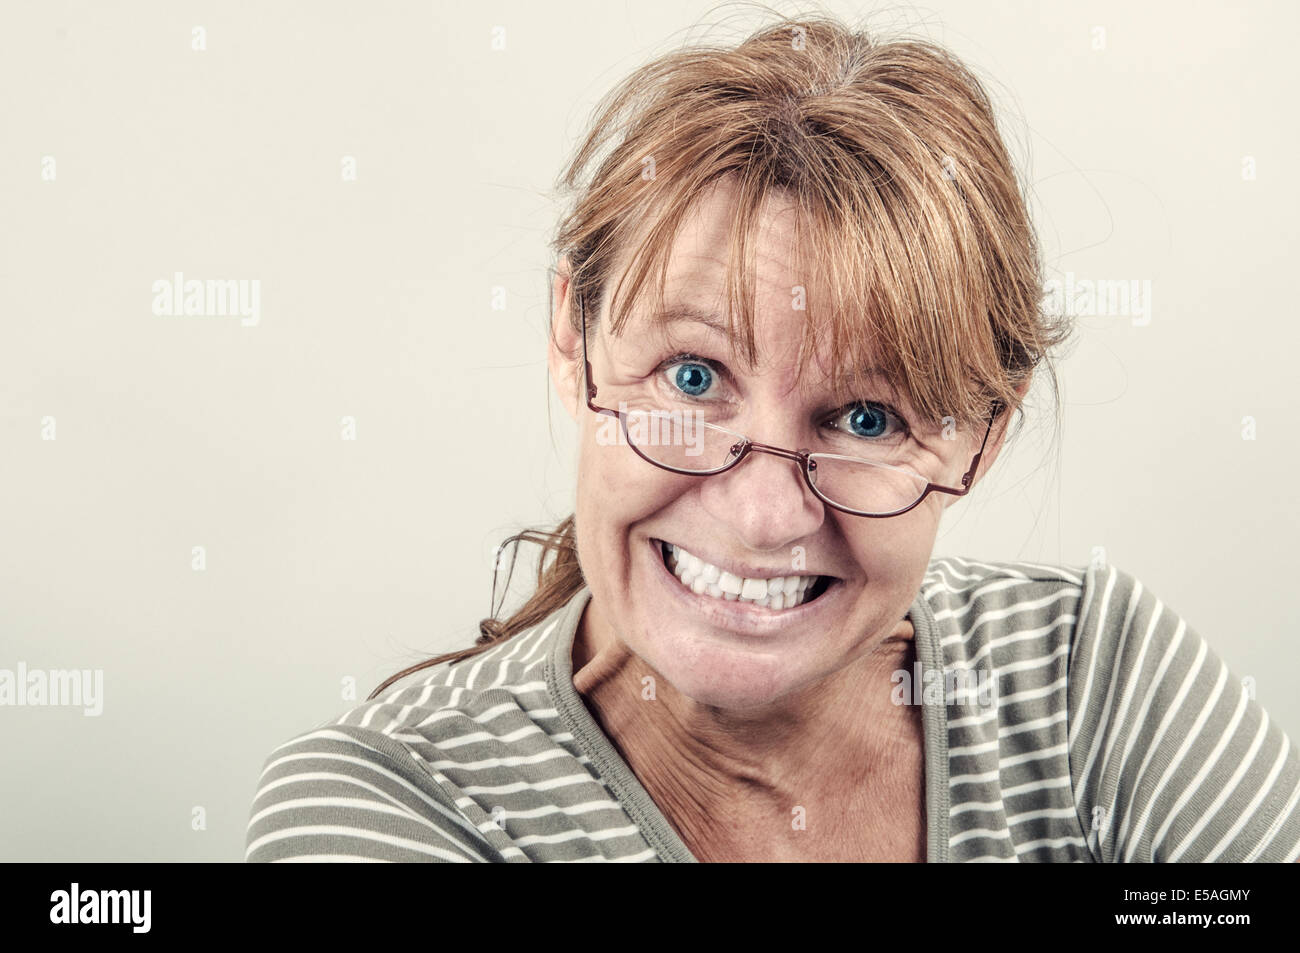 Portrait of a funny grimacing natural woman with reading glasses Stock Photo